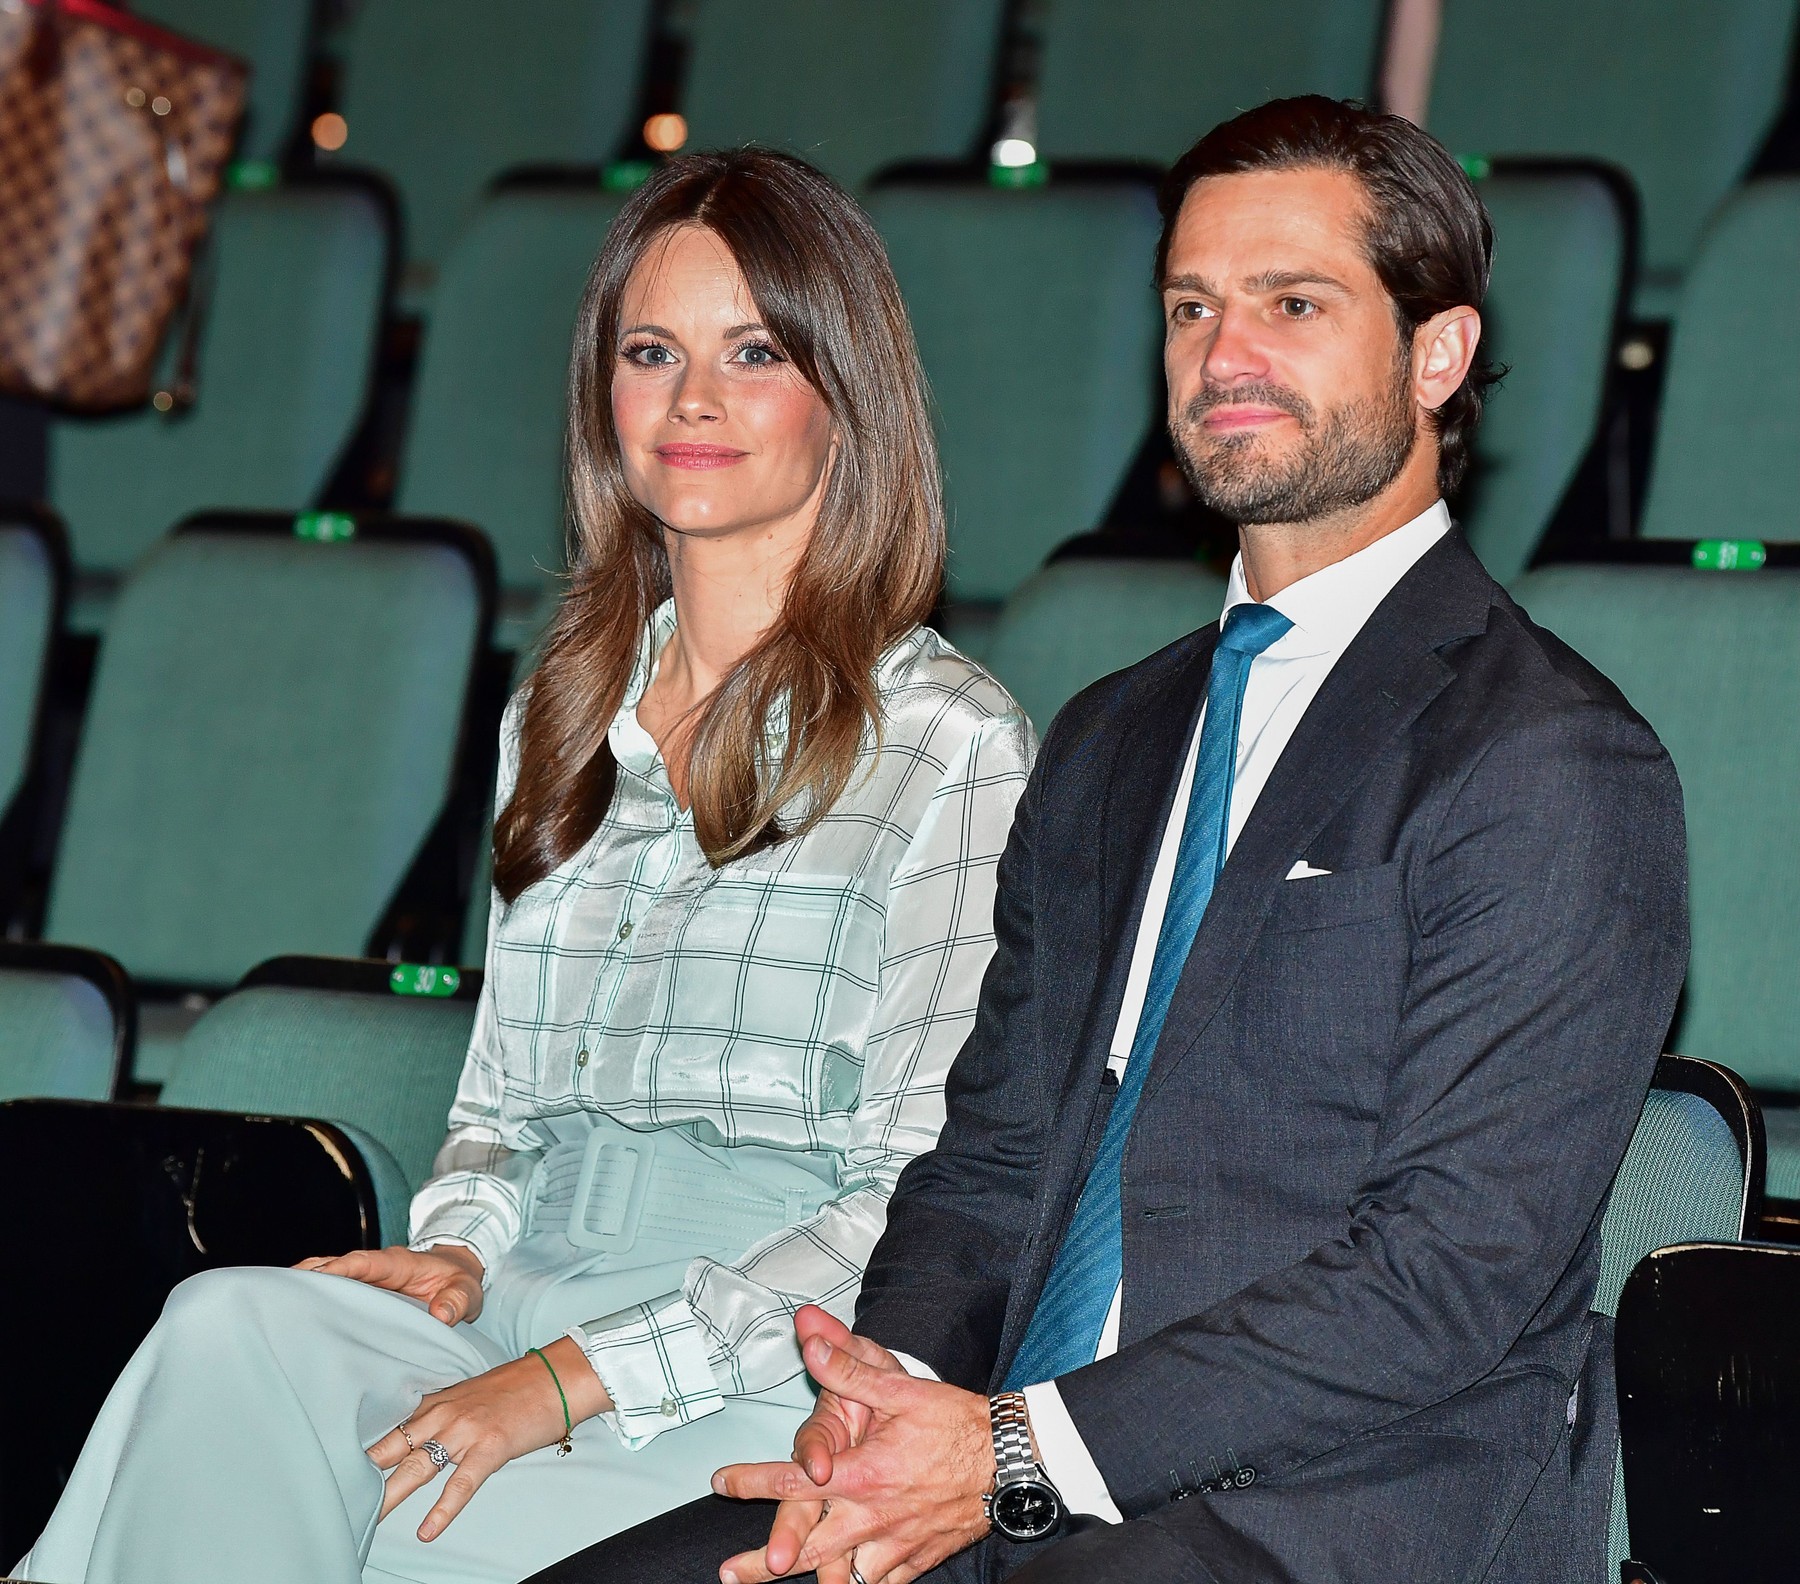 Prince Carl Philip and Princess Sofia arrive for a preview of the theatre performance; 'If I Say Something, it Only Gets Worse....'.
Prince Carl Philip and Princess Sofia arrive for a theatre performance, Kulturhuset Stadsteatern, Stockholm, Sweden - 23 Sep 2020,Image: 559438392, License: Rights-managed, Restrictions: , Model Release: no, Credit line: IBL / Shutterstock Editorial / Profimedia